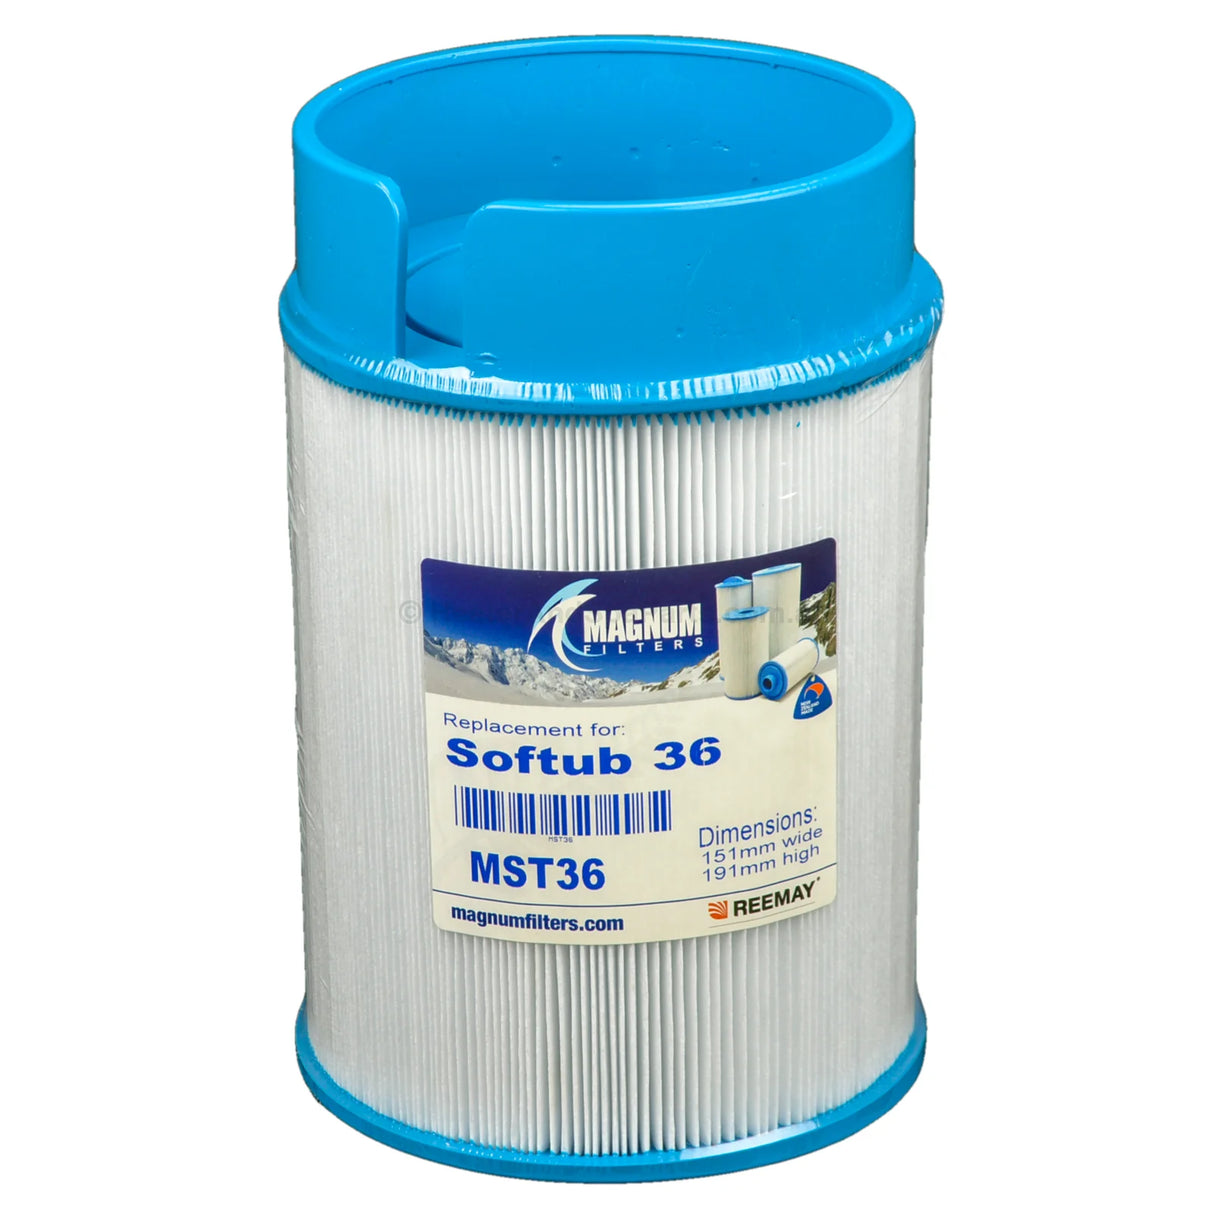 Softub Replacement Filter - Slip On 2003905 191Mm X 151Mm Cartridge Filters